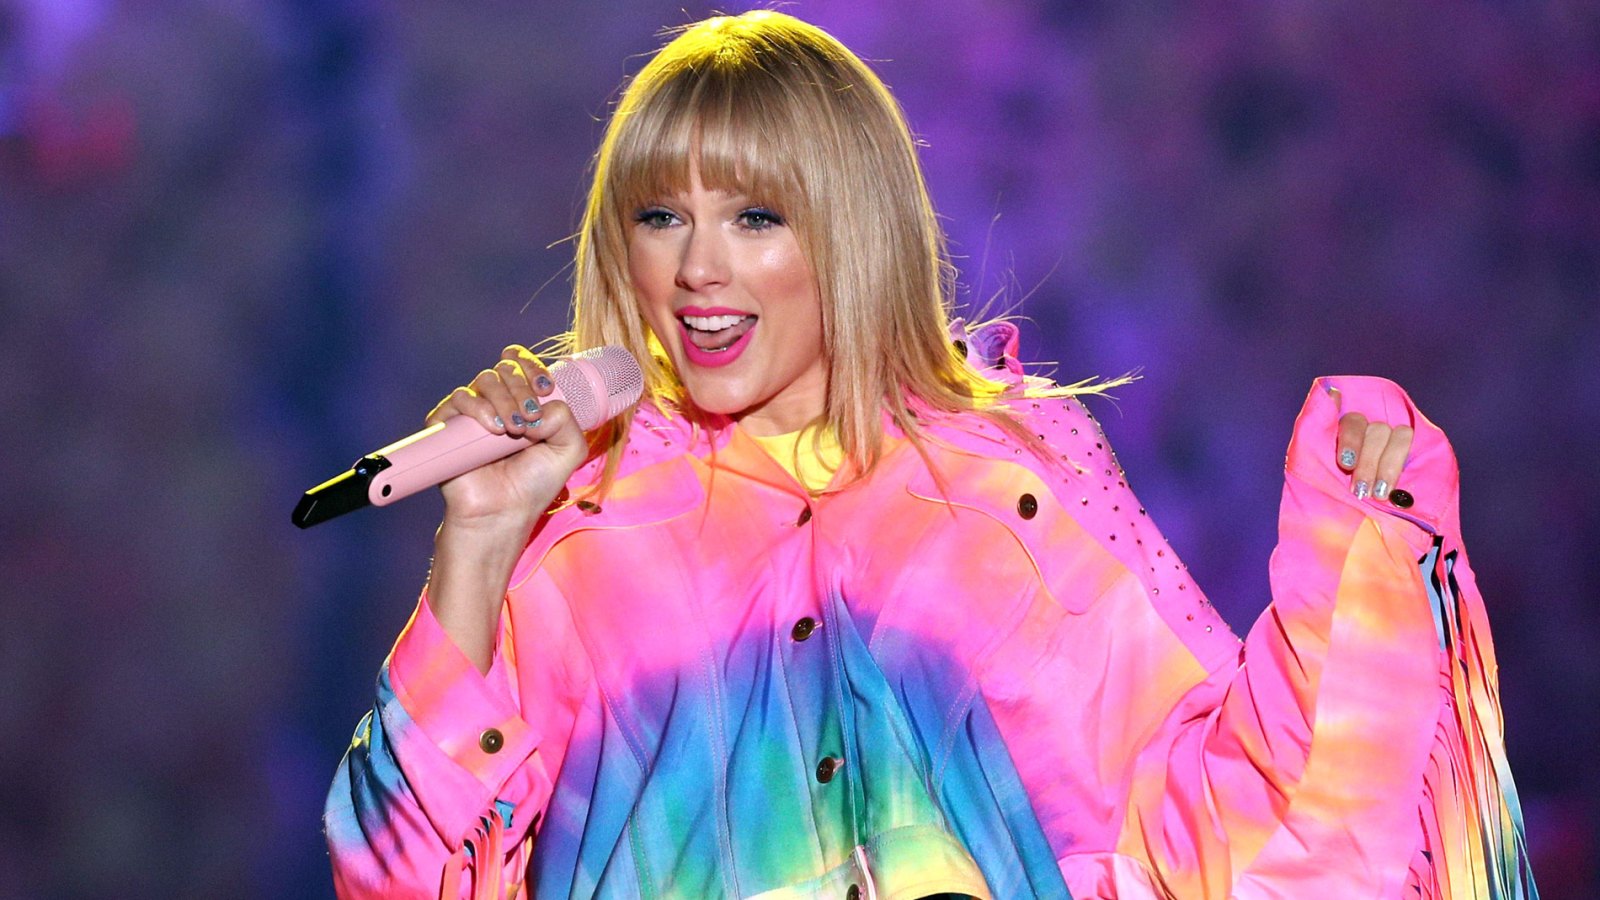 Taylor Swift Is Performing at the MTV Video Music Awards 2019